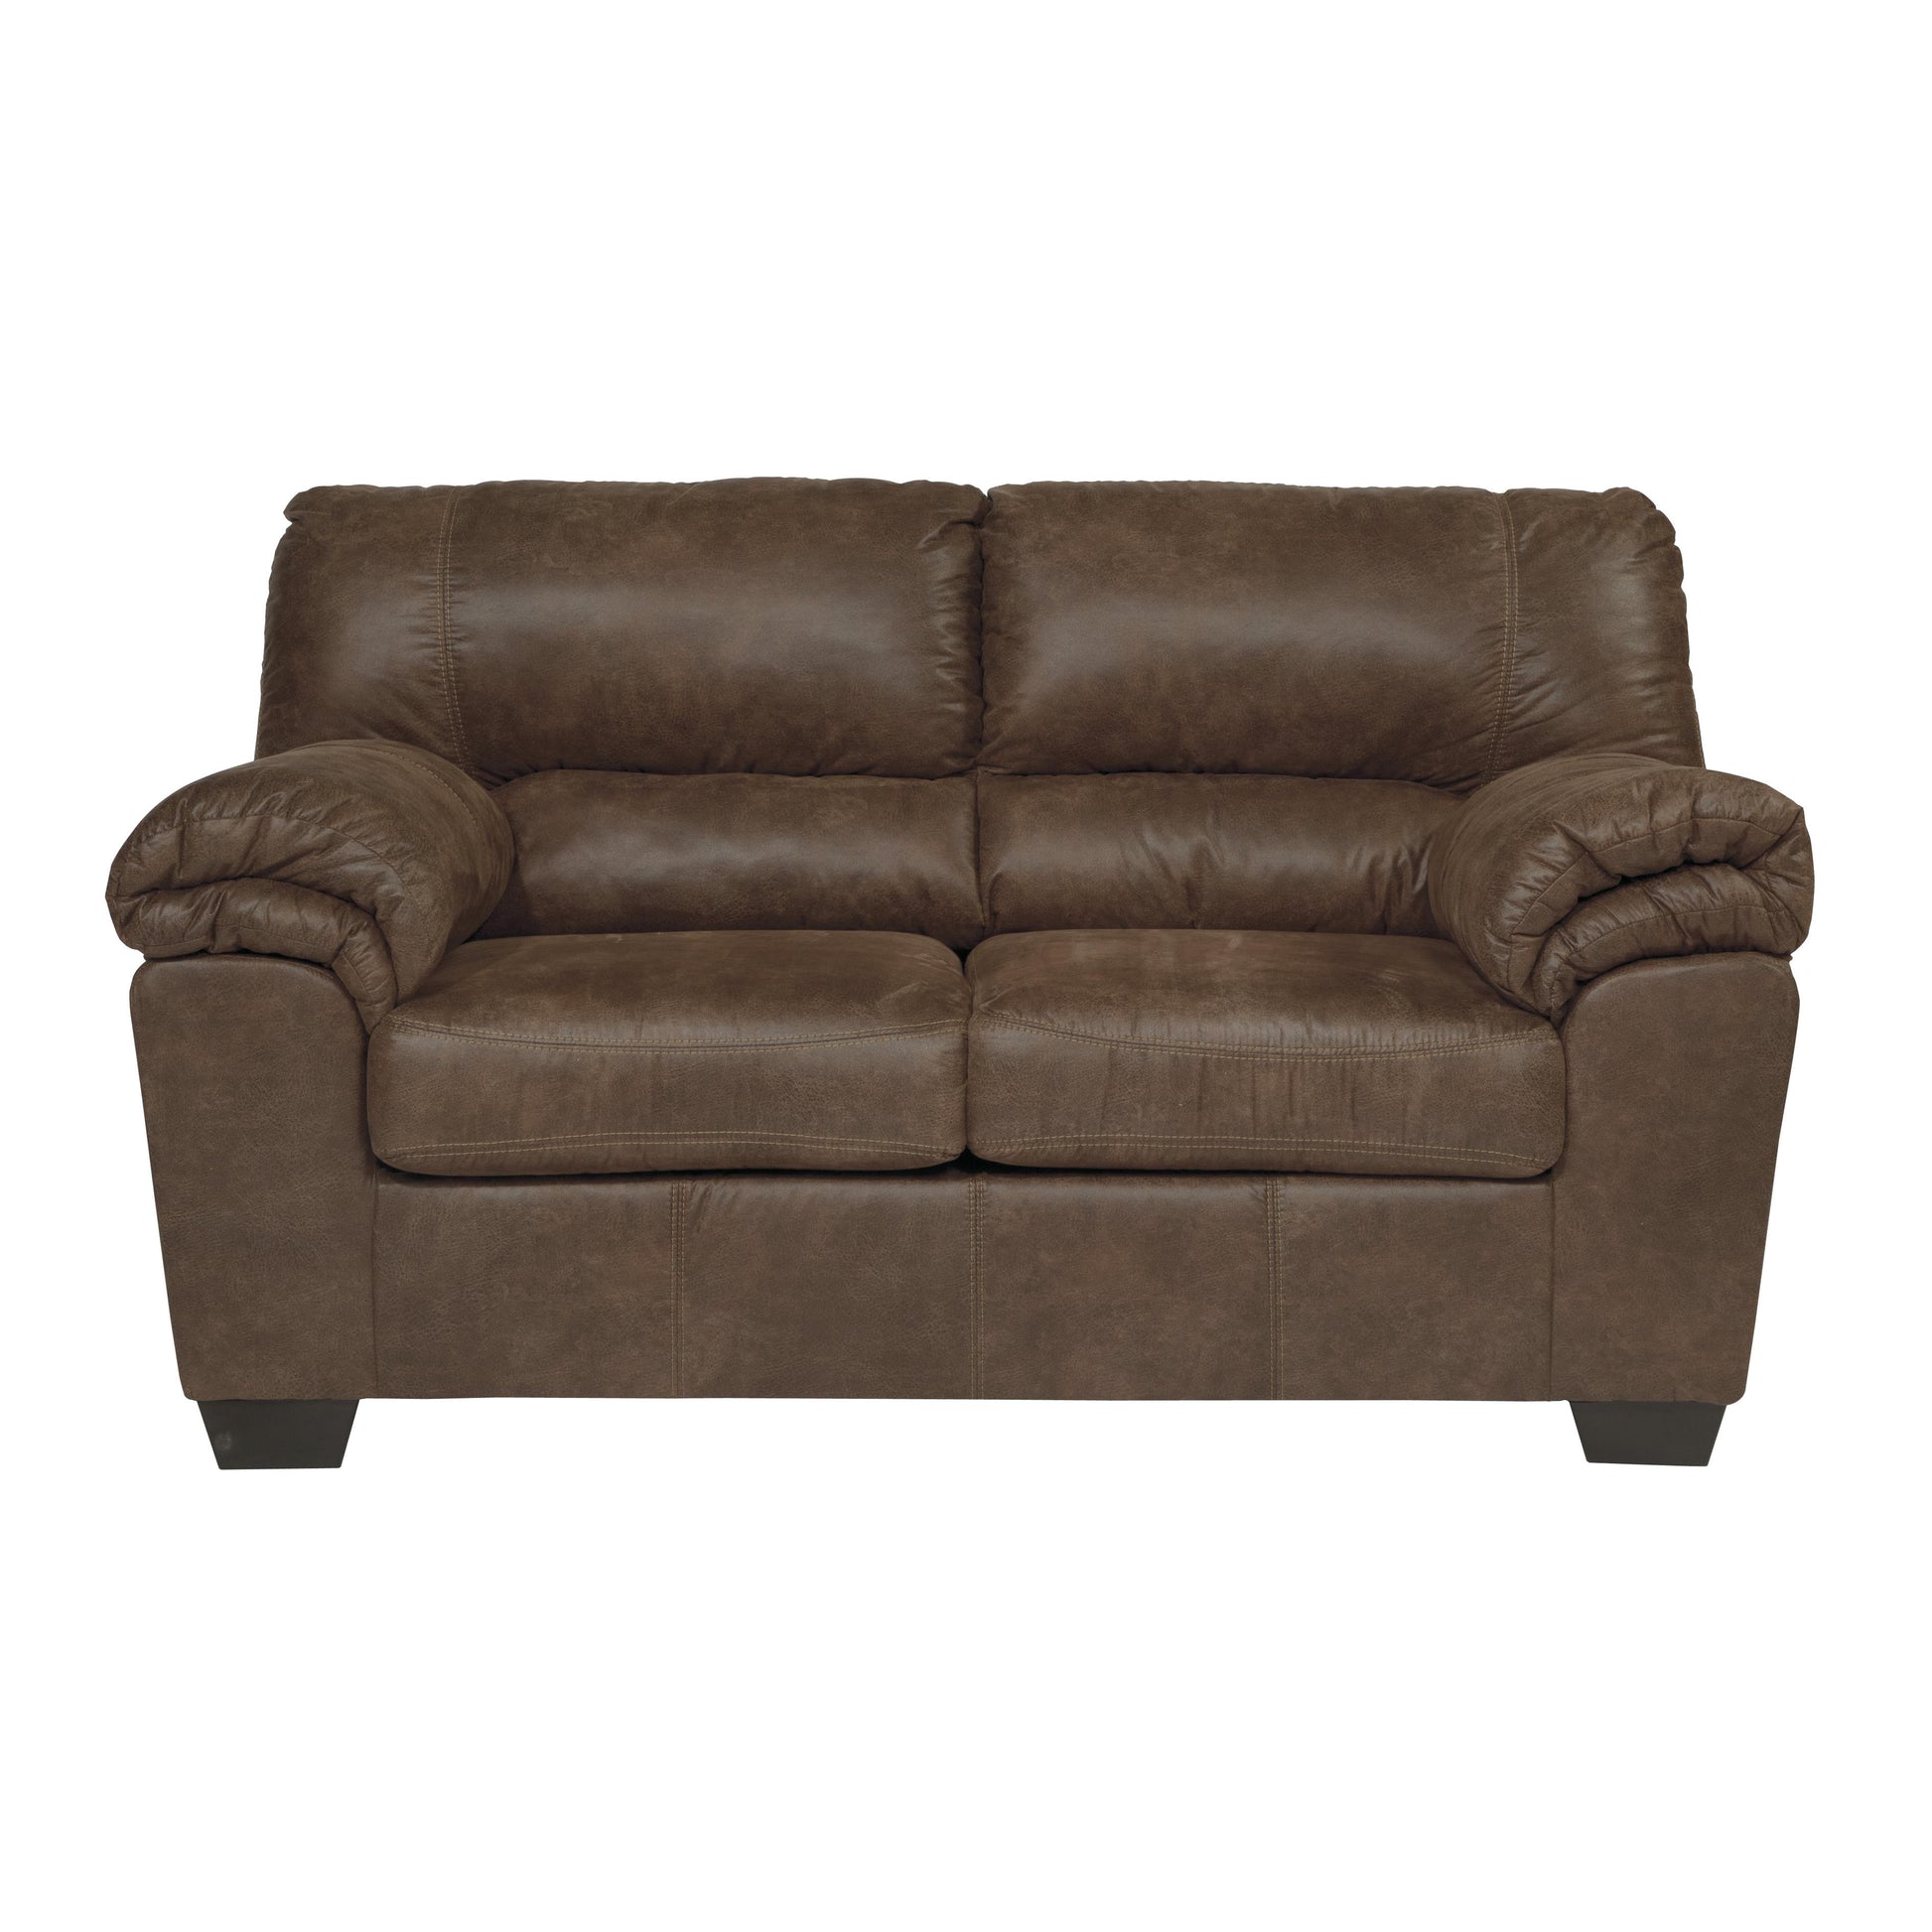 Signature Design by Ashley Bladen Stationary Leather Look Loveseat 1202035